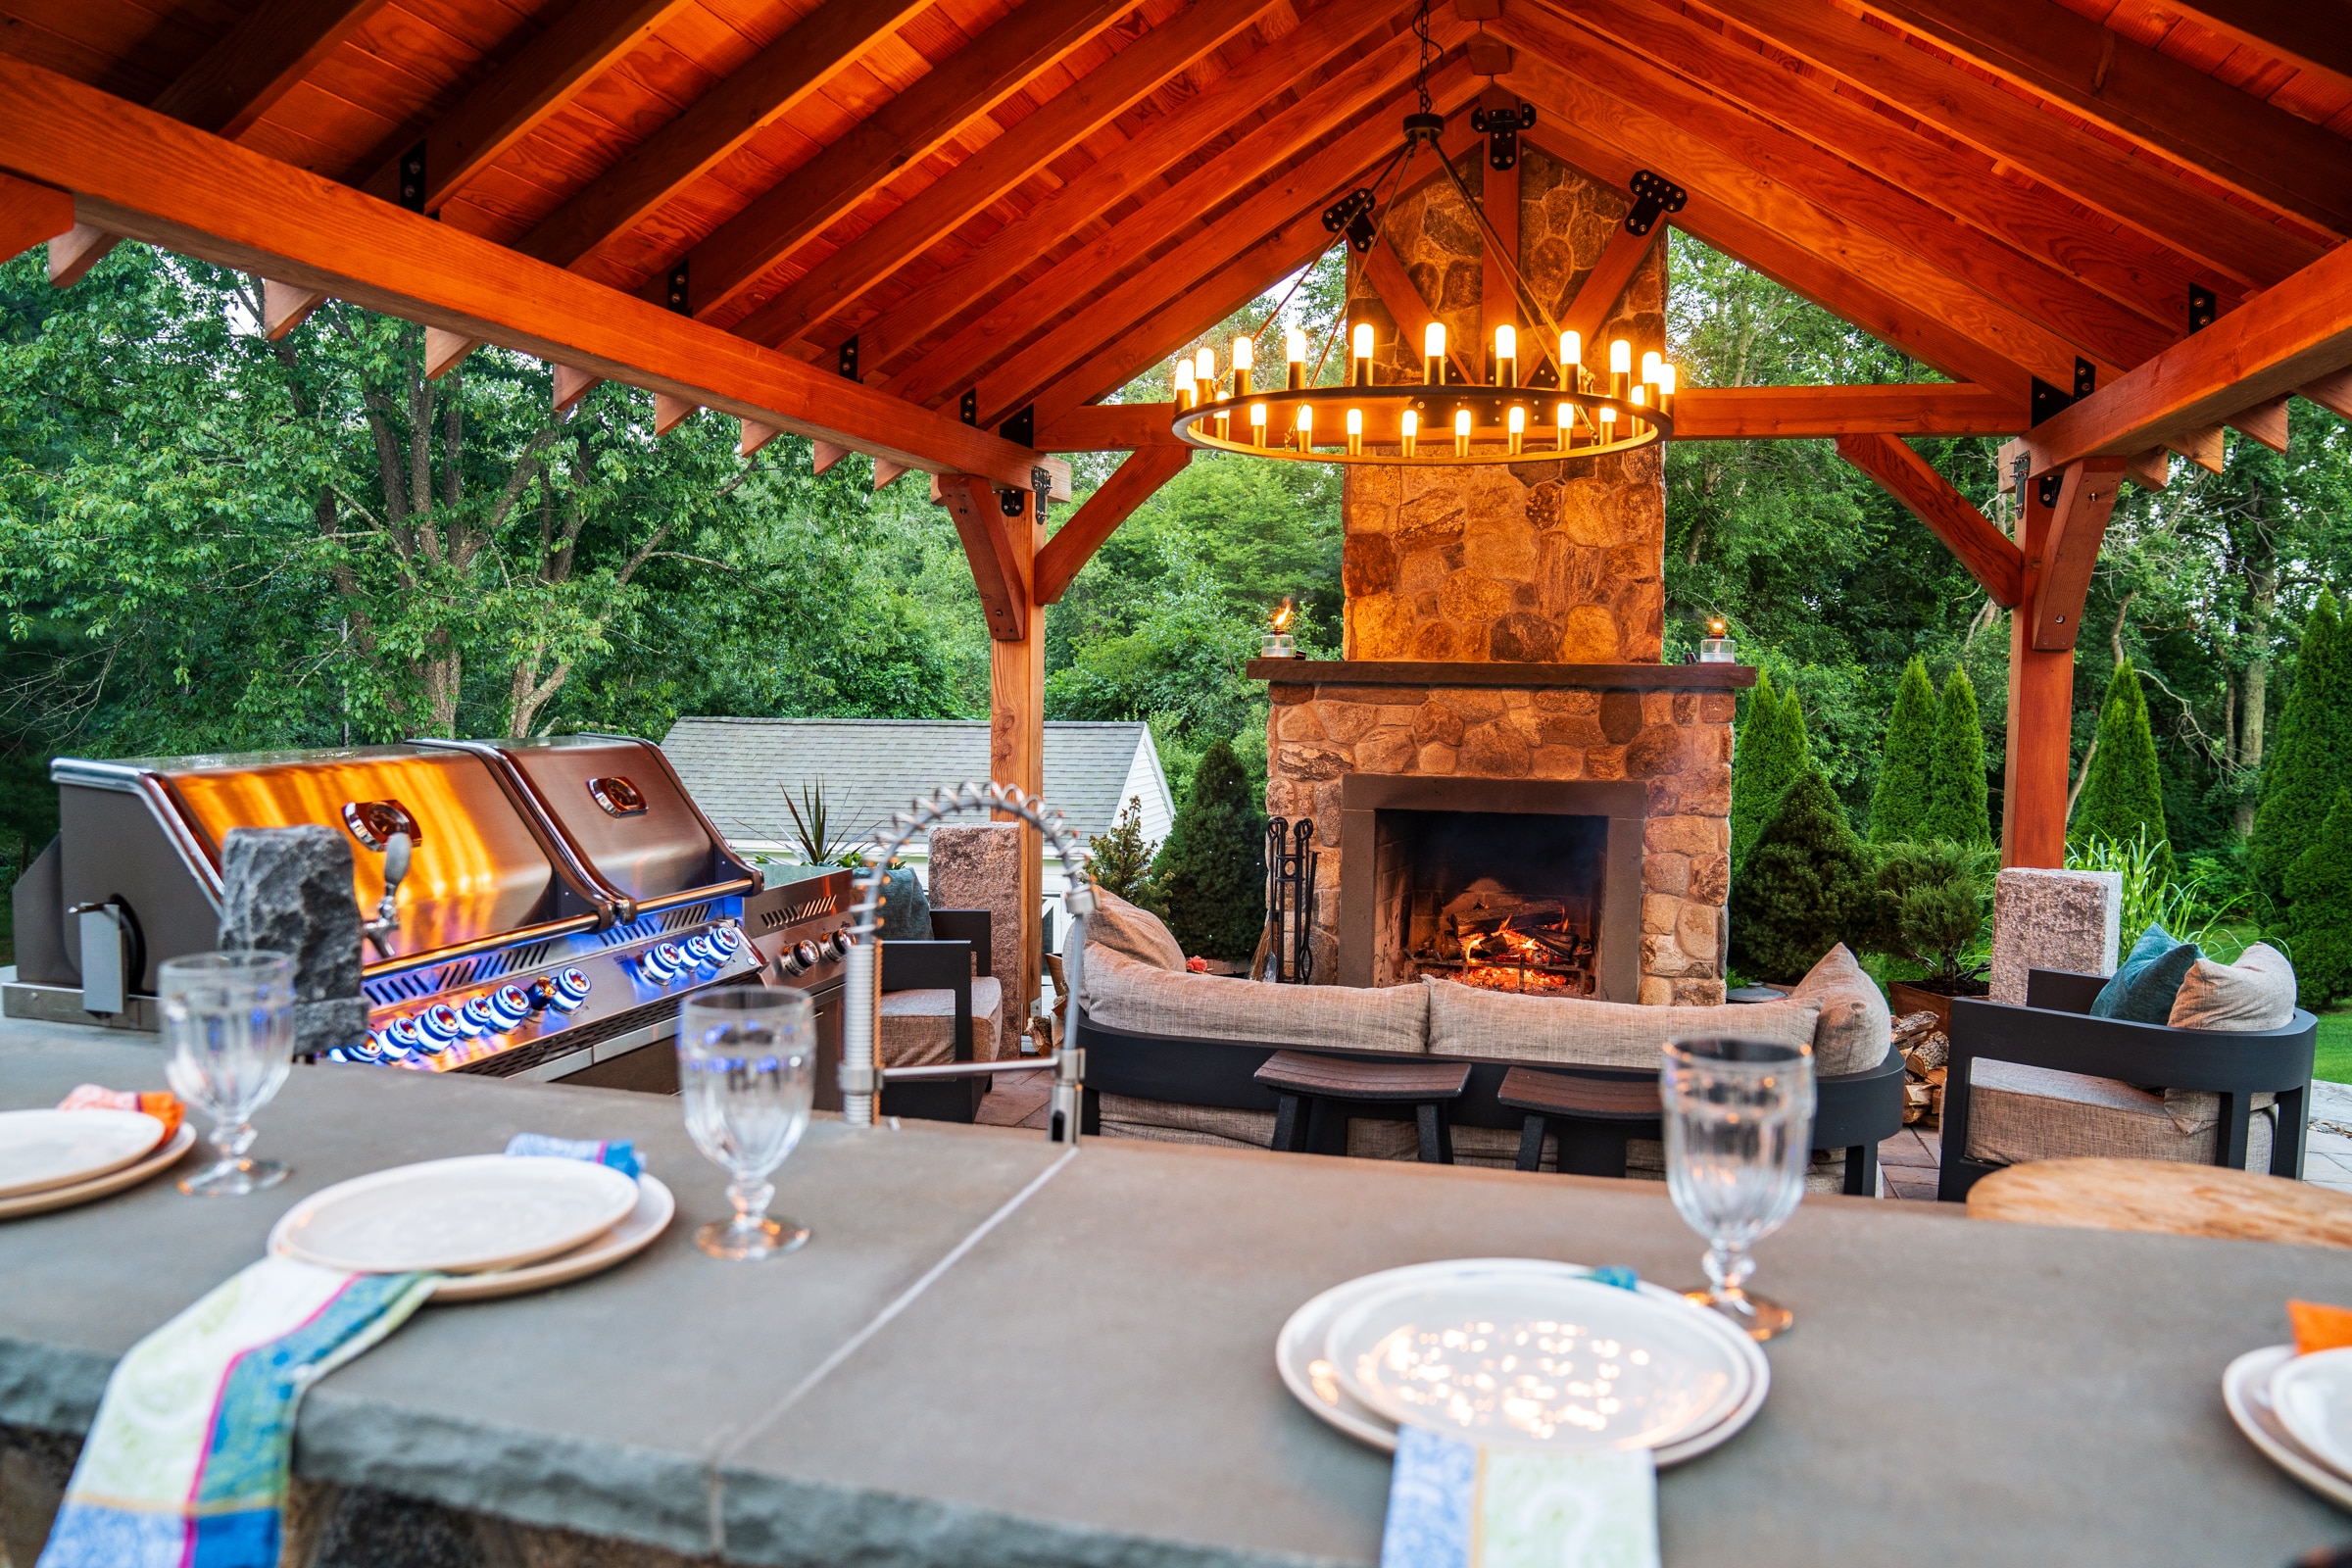 Our clients can ejnoy their outdoor fireplace while grilling food for guests under their pergola.